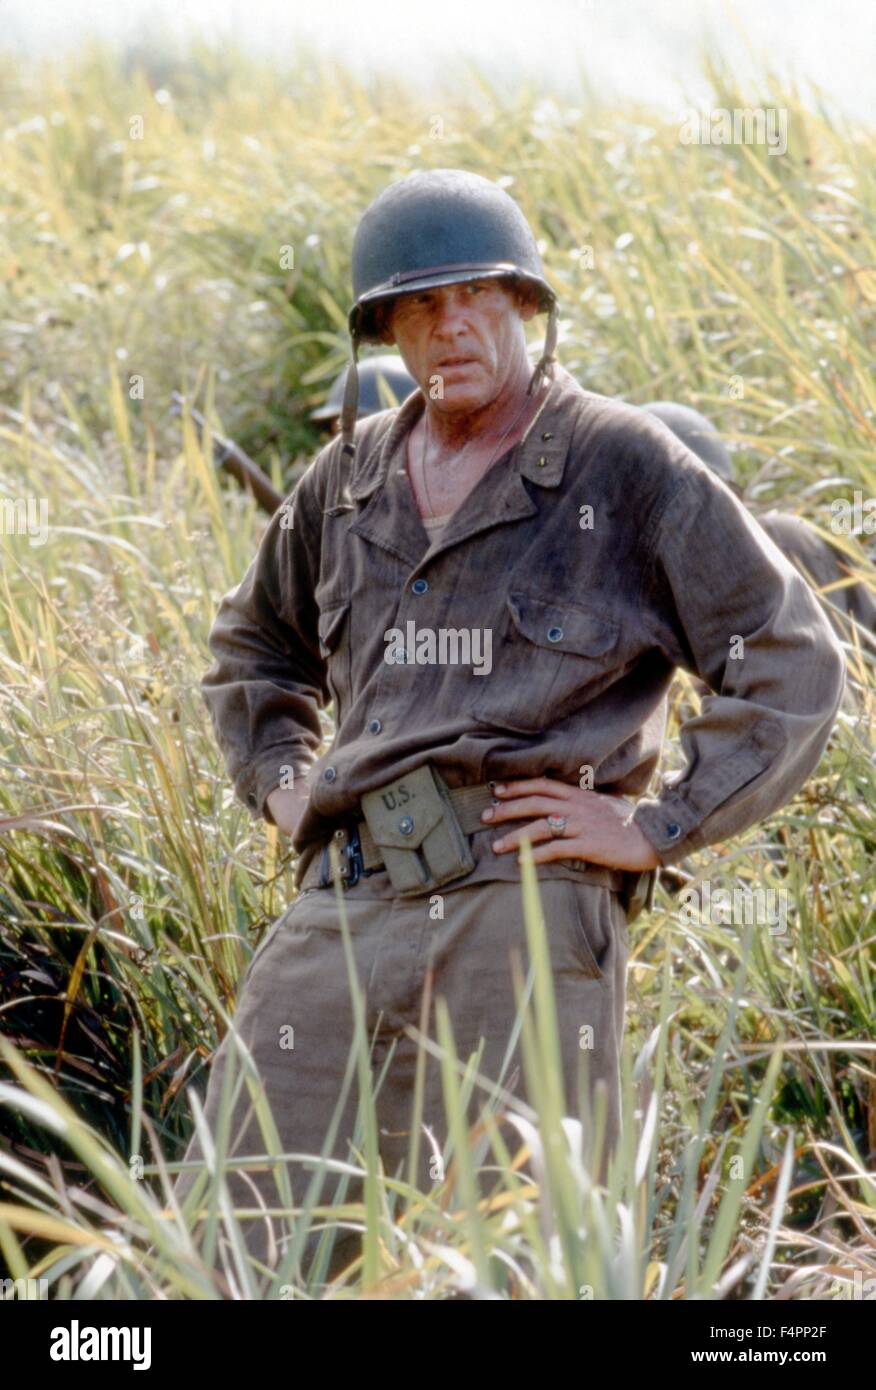 Nick Nolte / The Thin Red Line / 1998 directed by Terrence Malick  [Twentieth Century Fox Film Corpo] Stock Photo